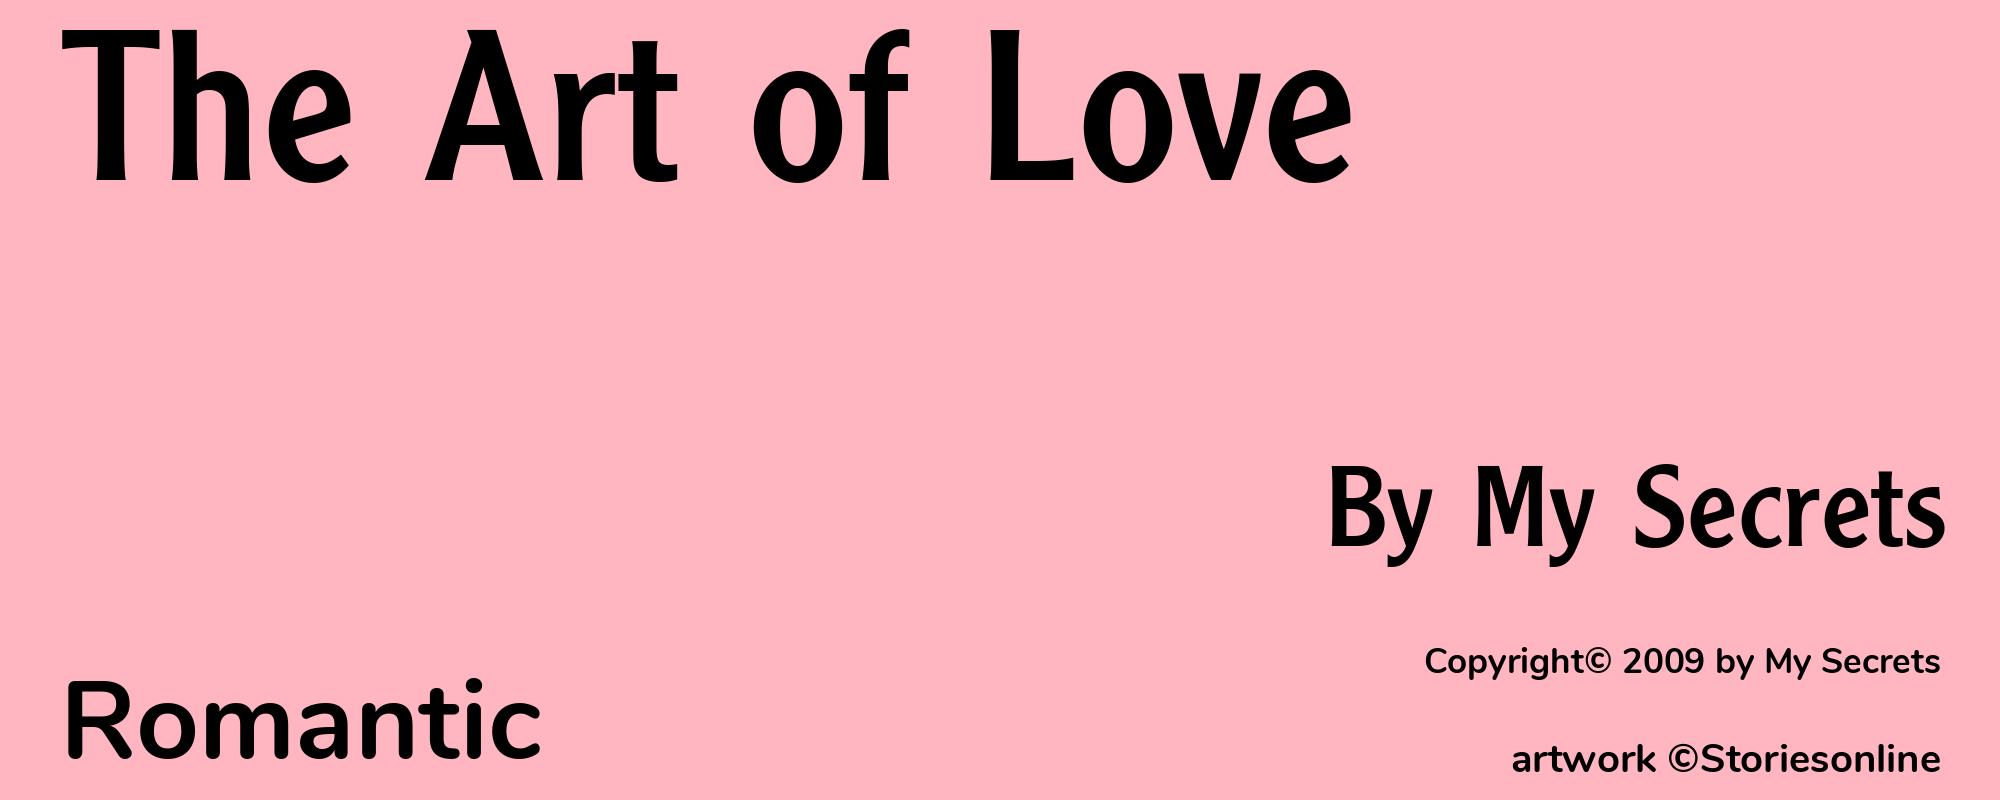 The Art of Love - Cover